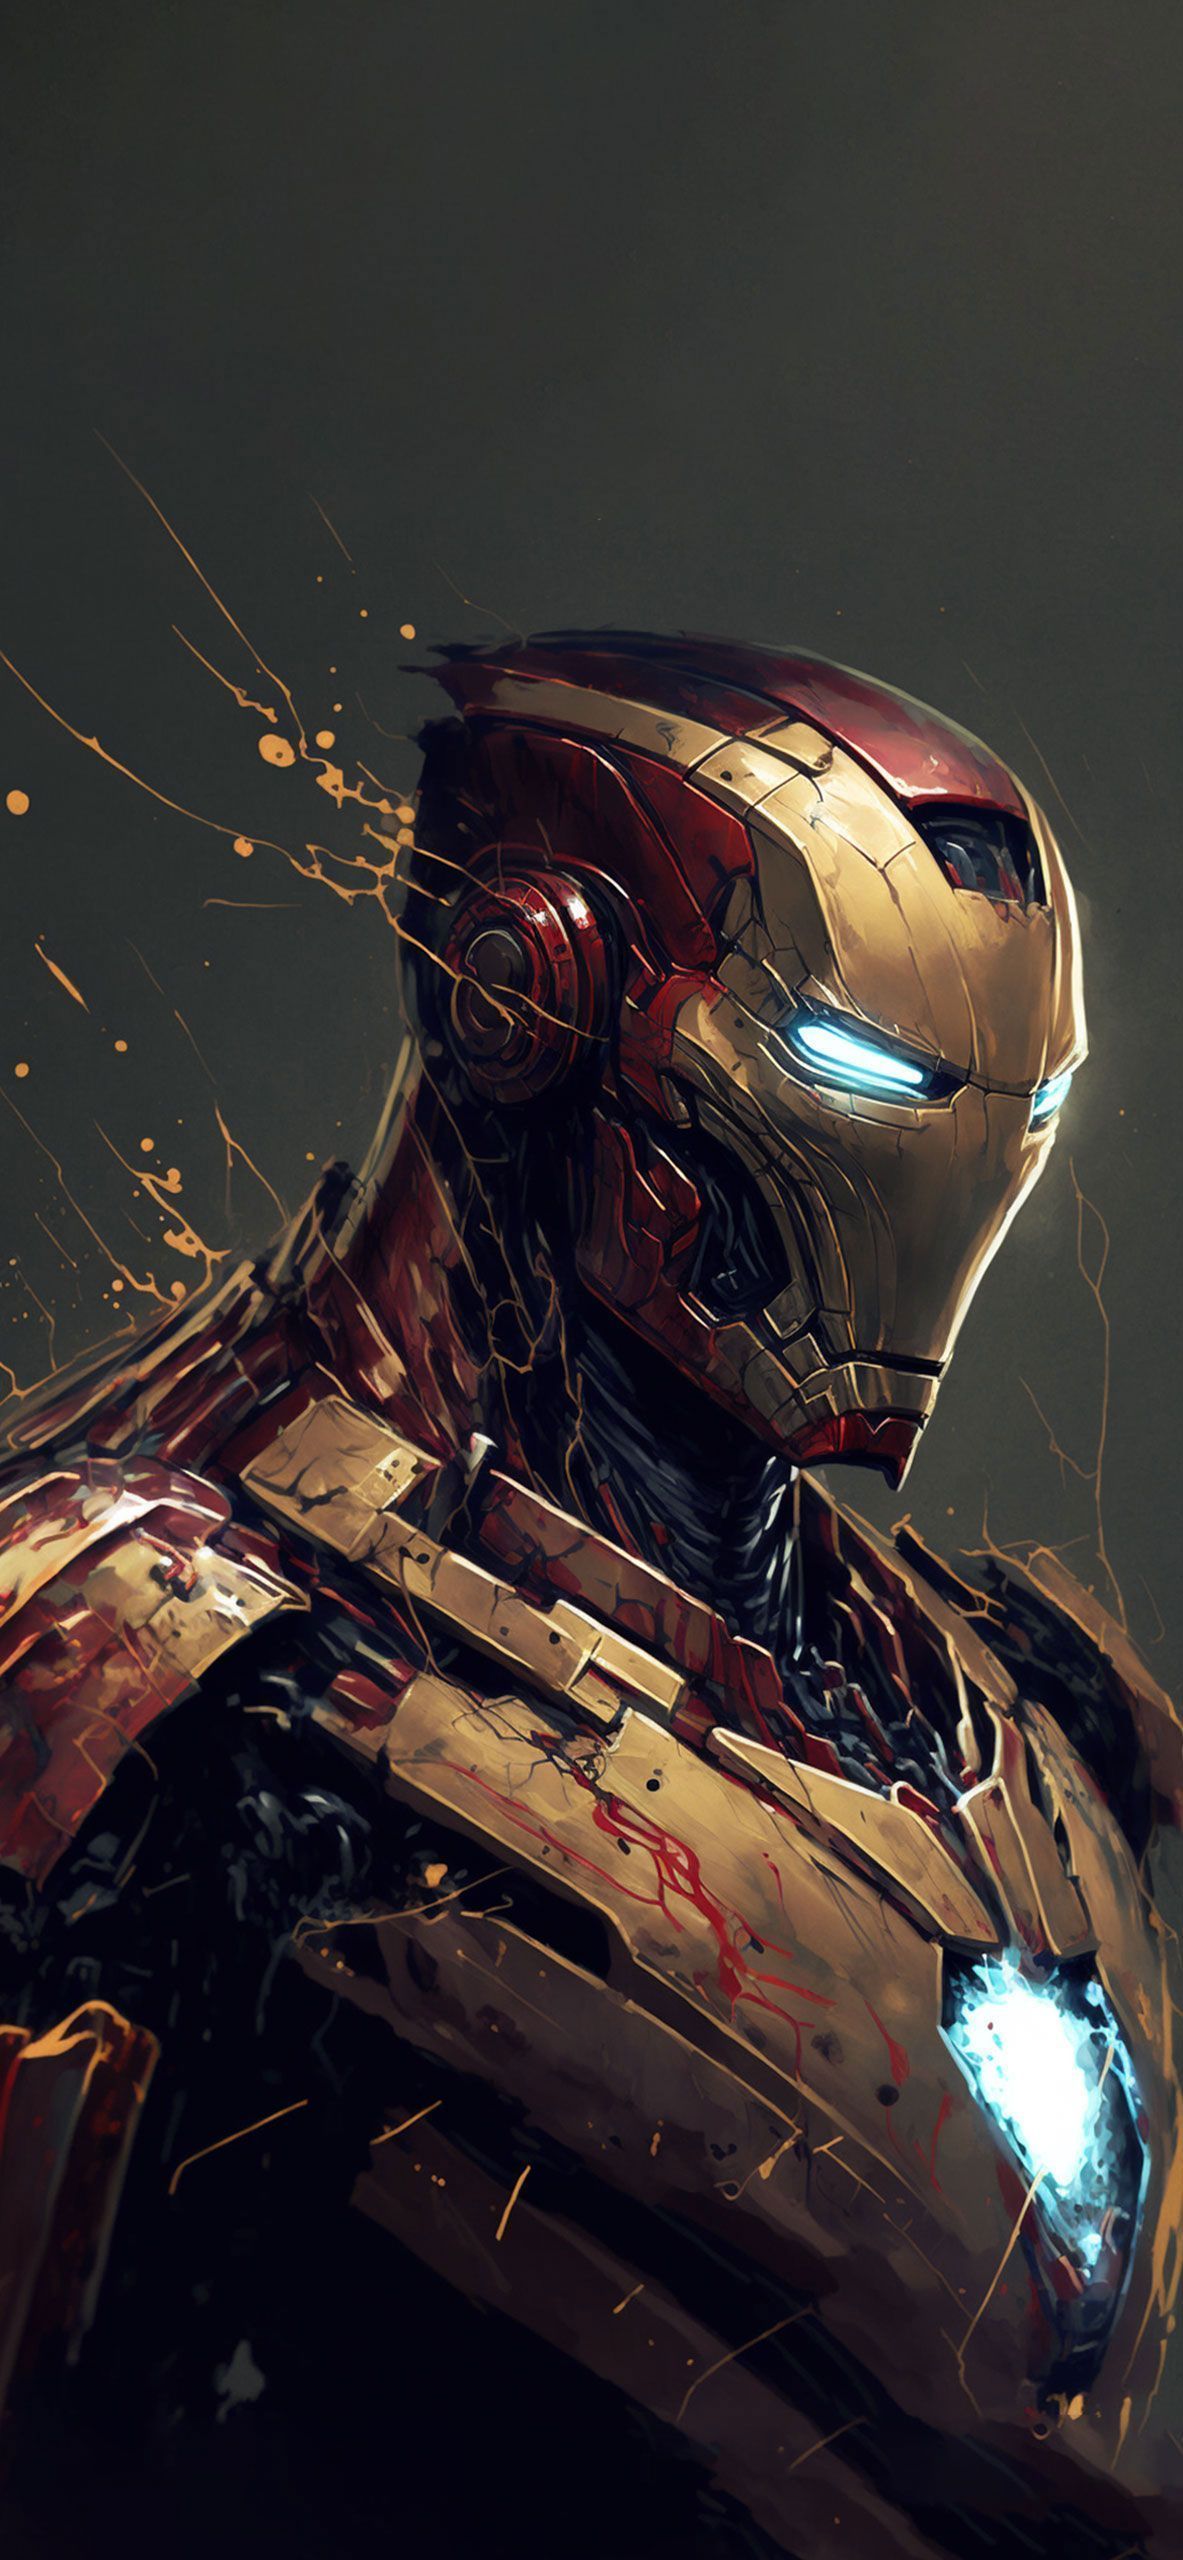 Iron Man iPhone 8 wallpaper, I made this Iron Man wallpaper for iPhone 8, you can use it as home screen wallpaper or lock screen wallpaper. - Marvel, Avengers